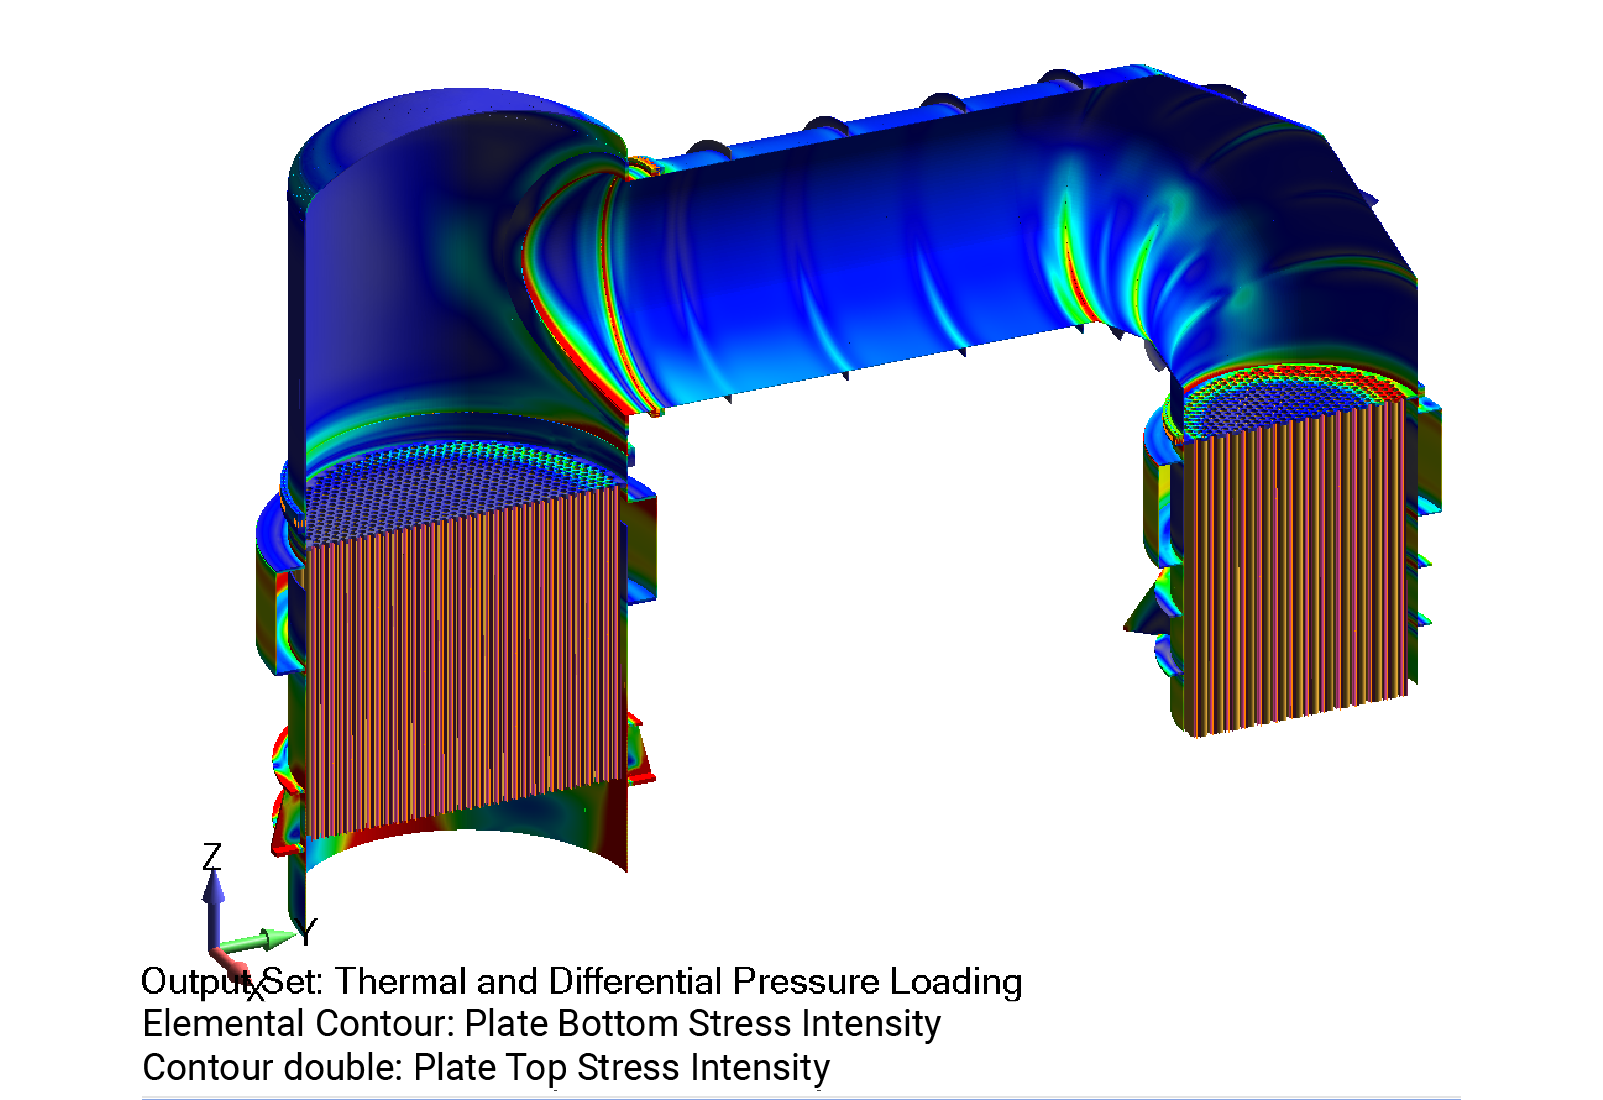 ASME stress intensity results contoured over the ASME Section VIII, Division 2 pressure vessel - Predictive Engineering ASME BPVC Pressure Vessel Consulting Services